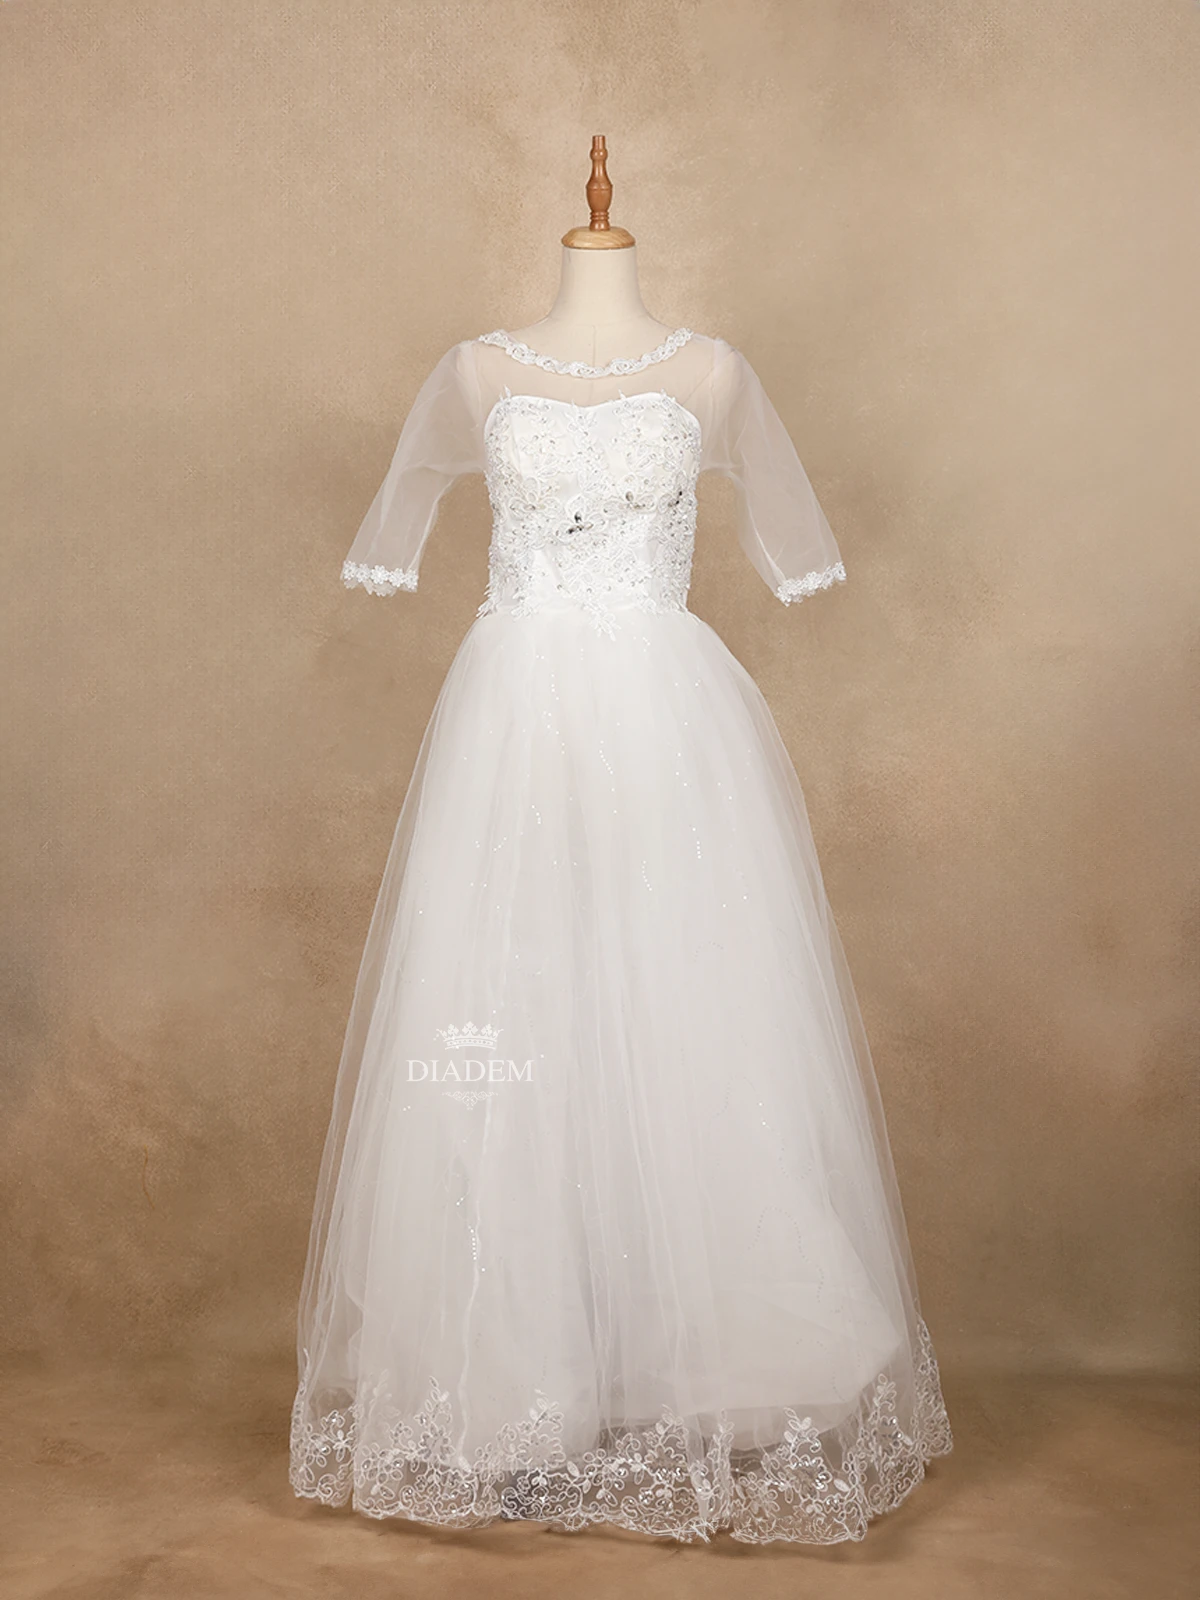 White Net Gown Adorned with Floral Lace And Stone Work A-line Wedding Gown